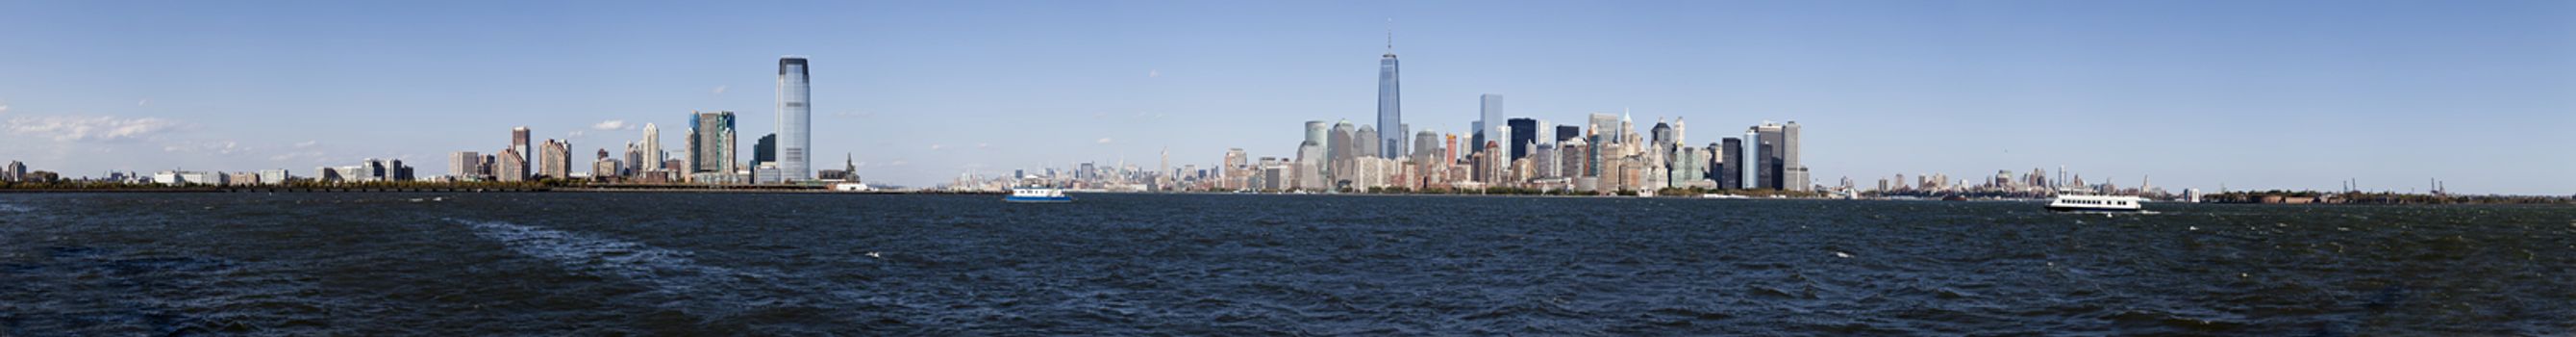 Panorama New York City, Jersey City, Brooklyn and Governors Island